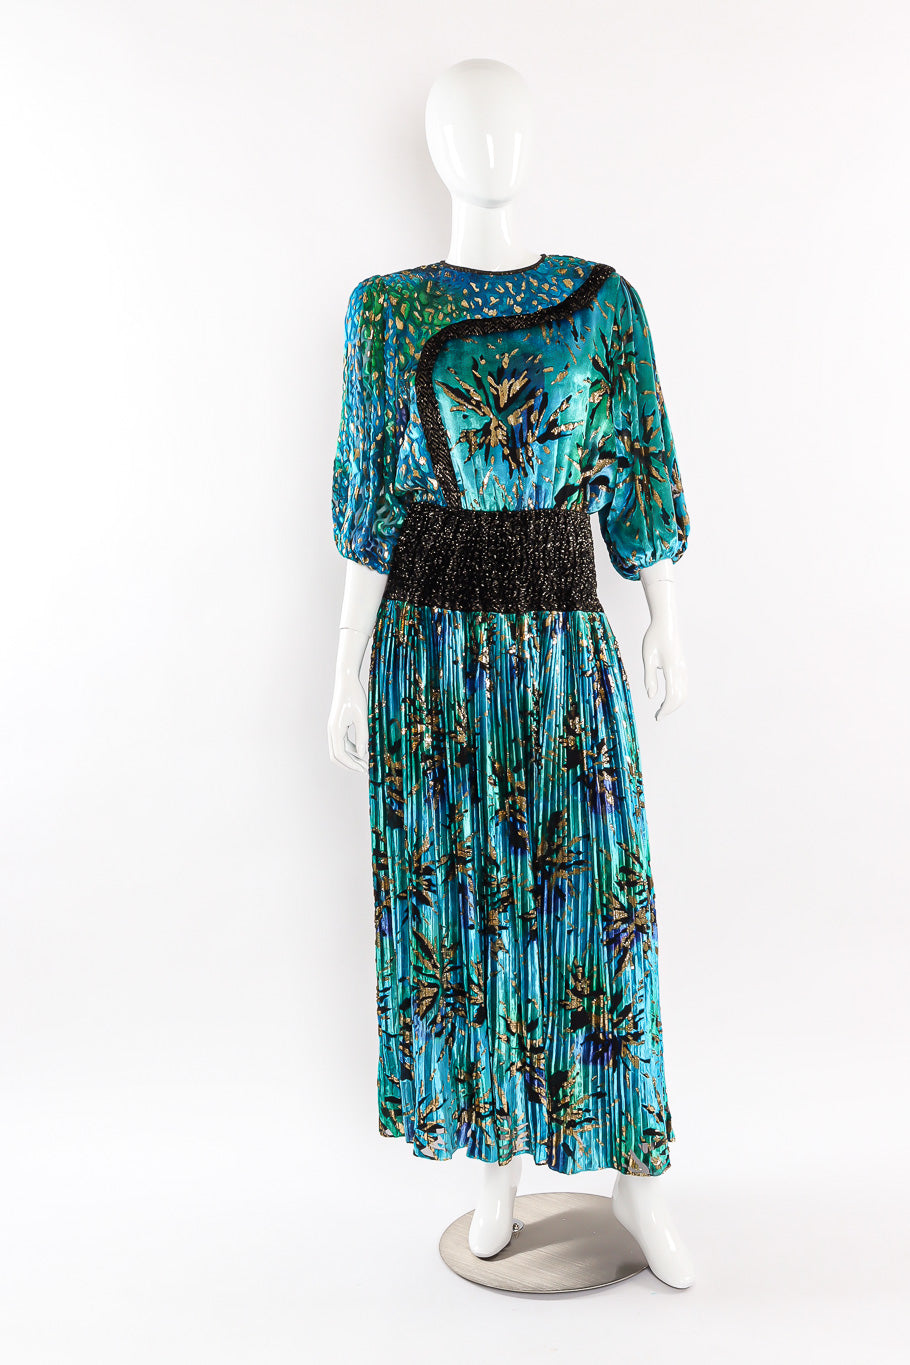 Multi-printed silk limited edition dress by Diane Freis front on mannequin @recessla